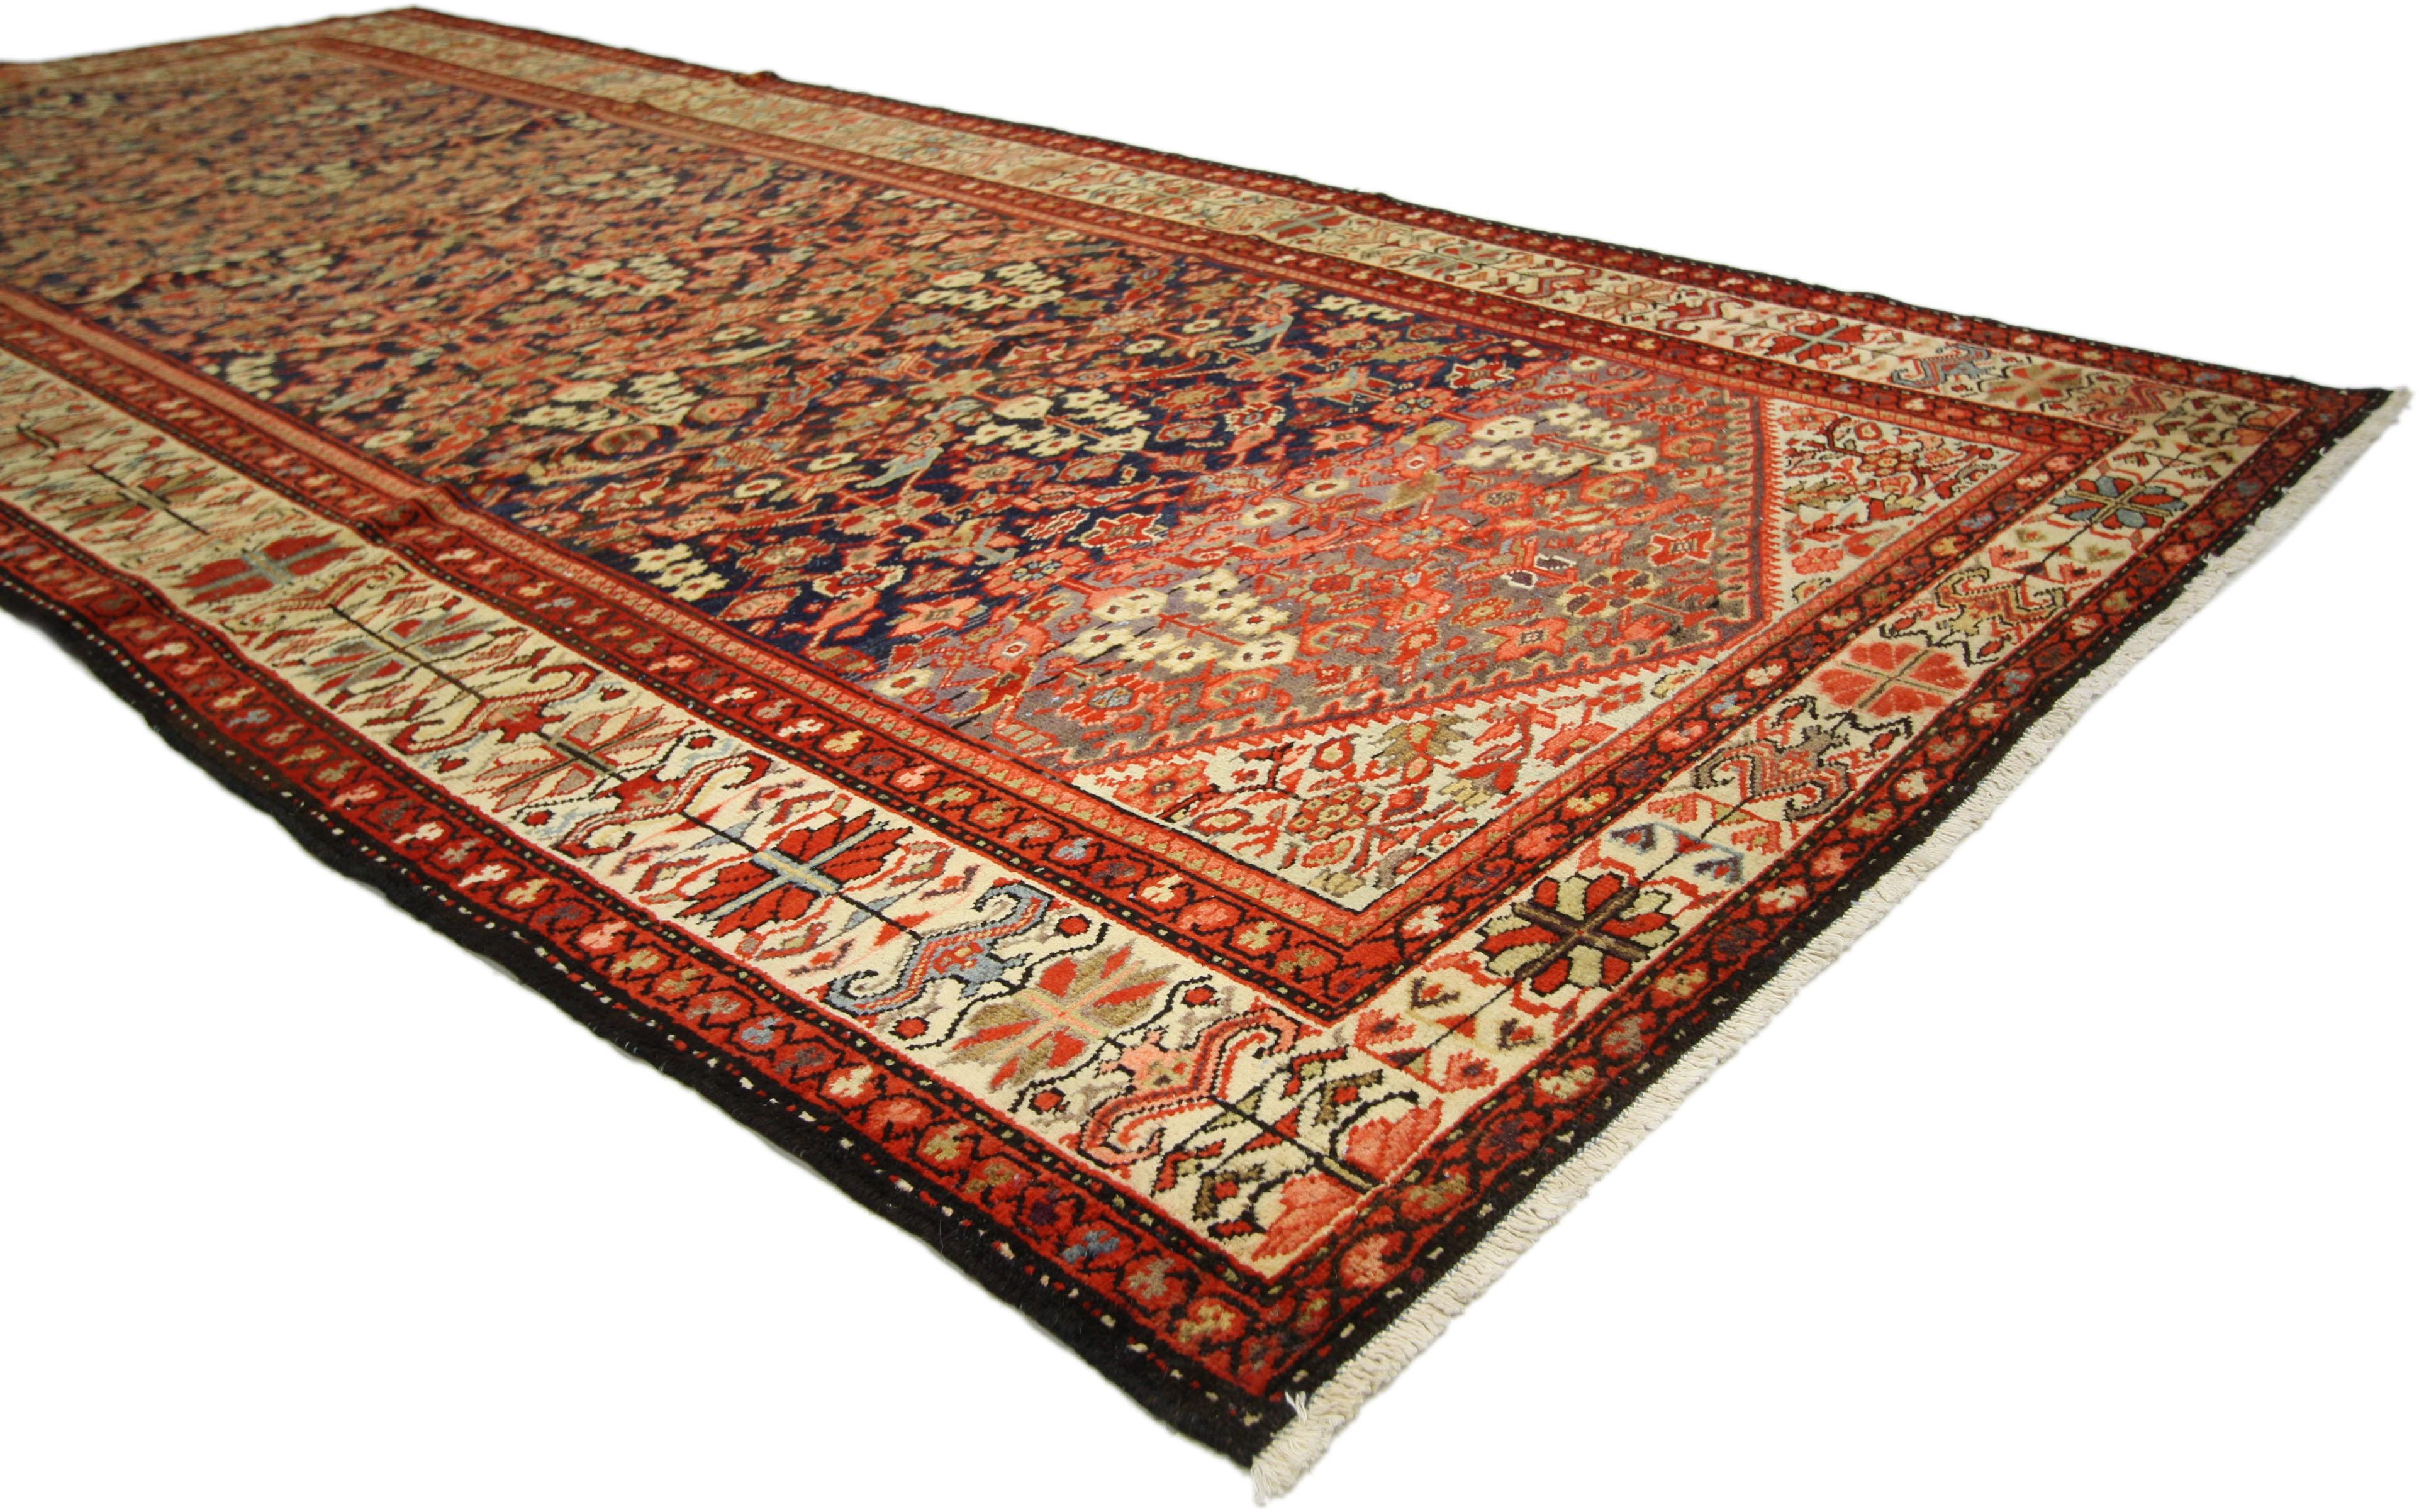 76577, antique Persian Malayer gallery rug, wide hallway runner. Full of character and stately presence, this hand-knotted wool antique Persian Malayer gallery rug showcases an intrinsic geometric MIna Khaki pattern composed of blossoms, Herati,